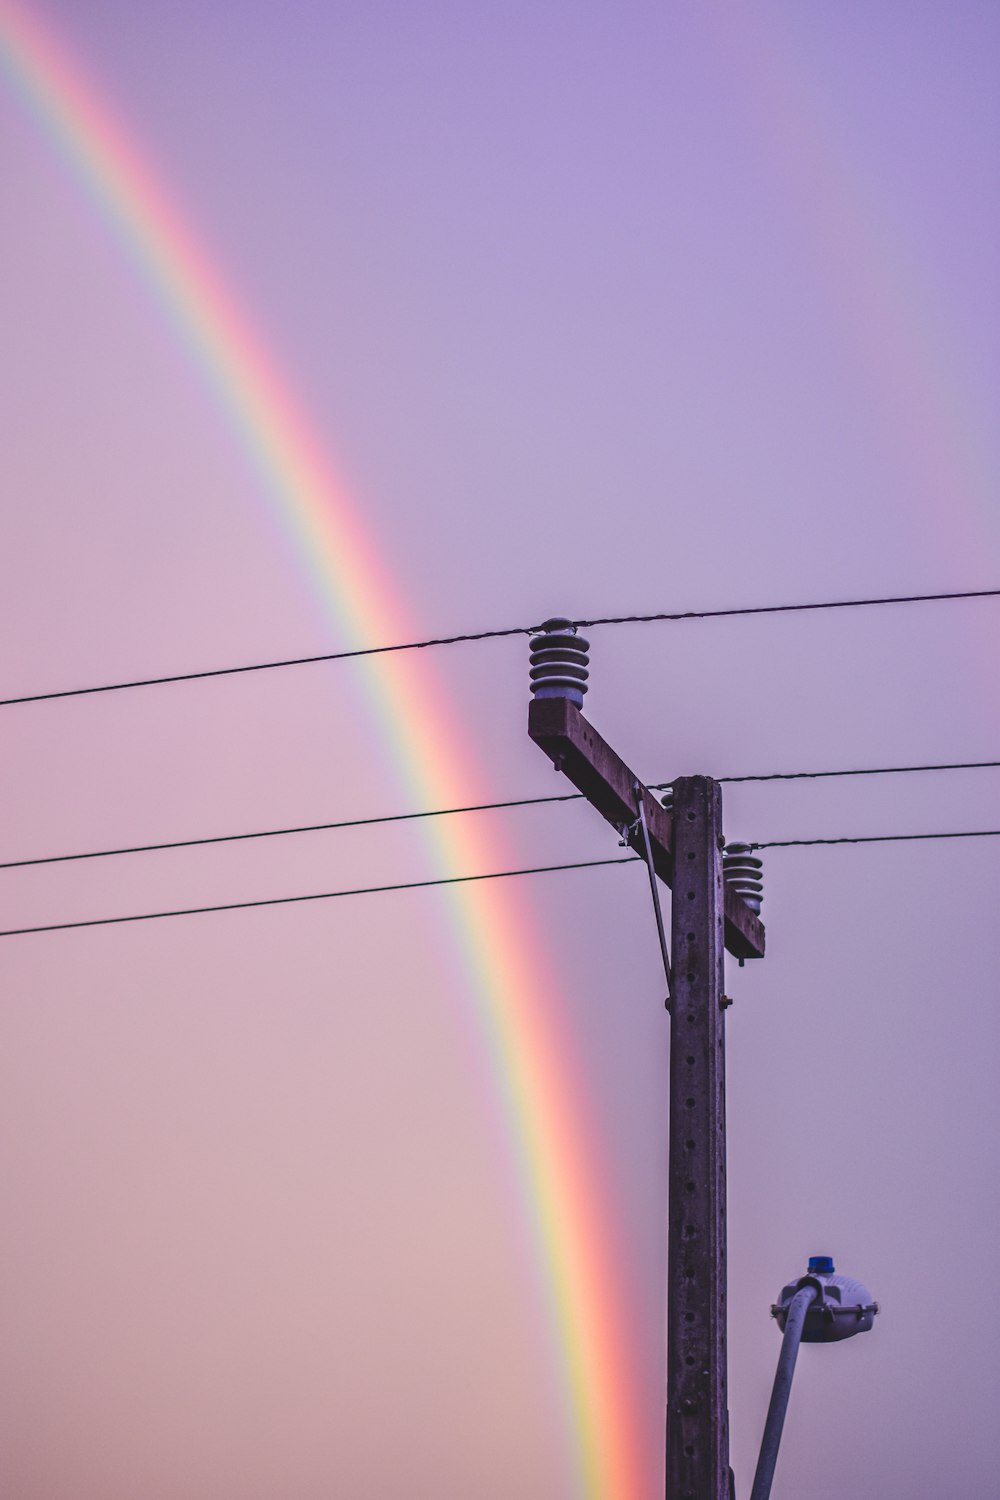 a double rainbow in the sky over power lines